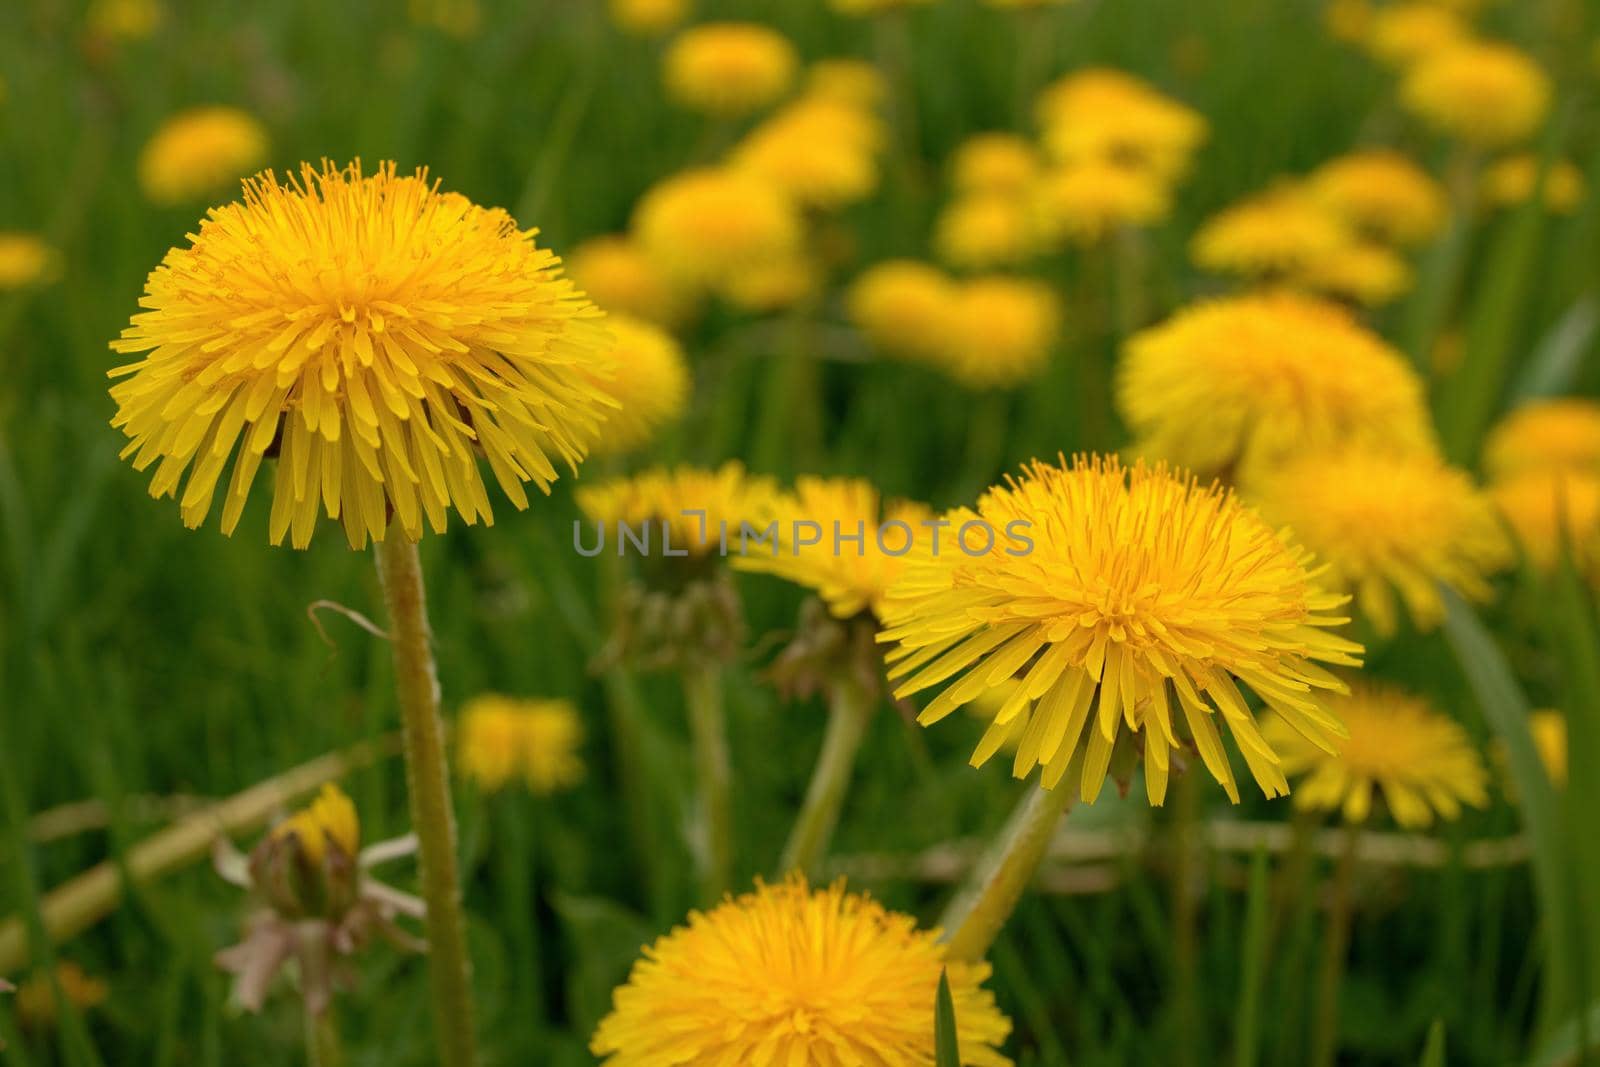 Low Angle Close up of Dandelion Flowers or Weeds Growing in Grass in Spring. High quality photo